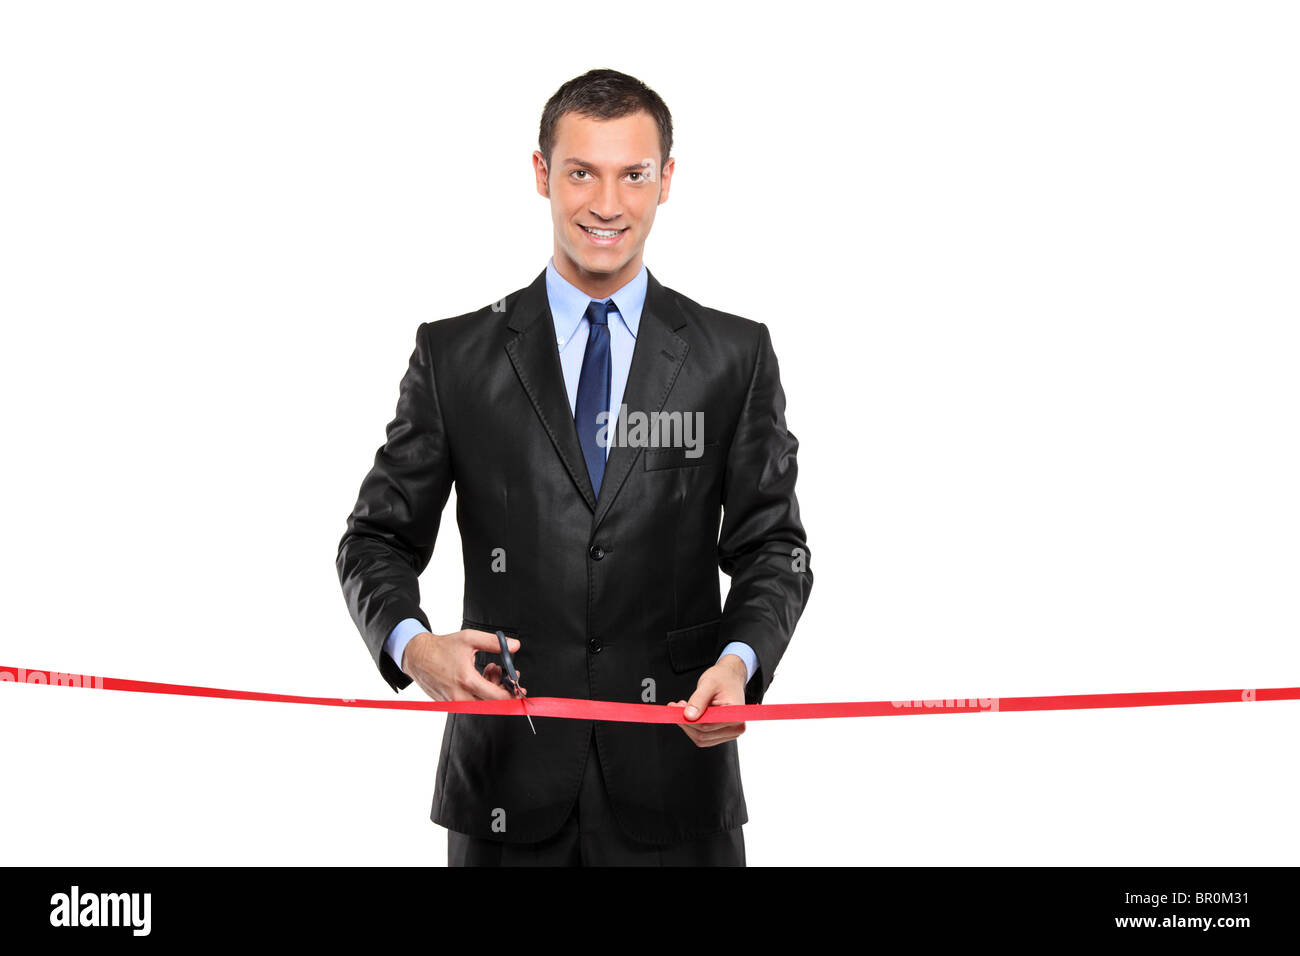 A man cutting a red ribbon, opening ceremony Stock Photo